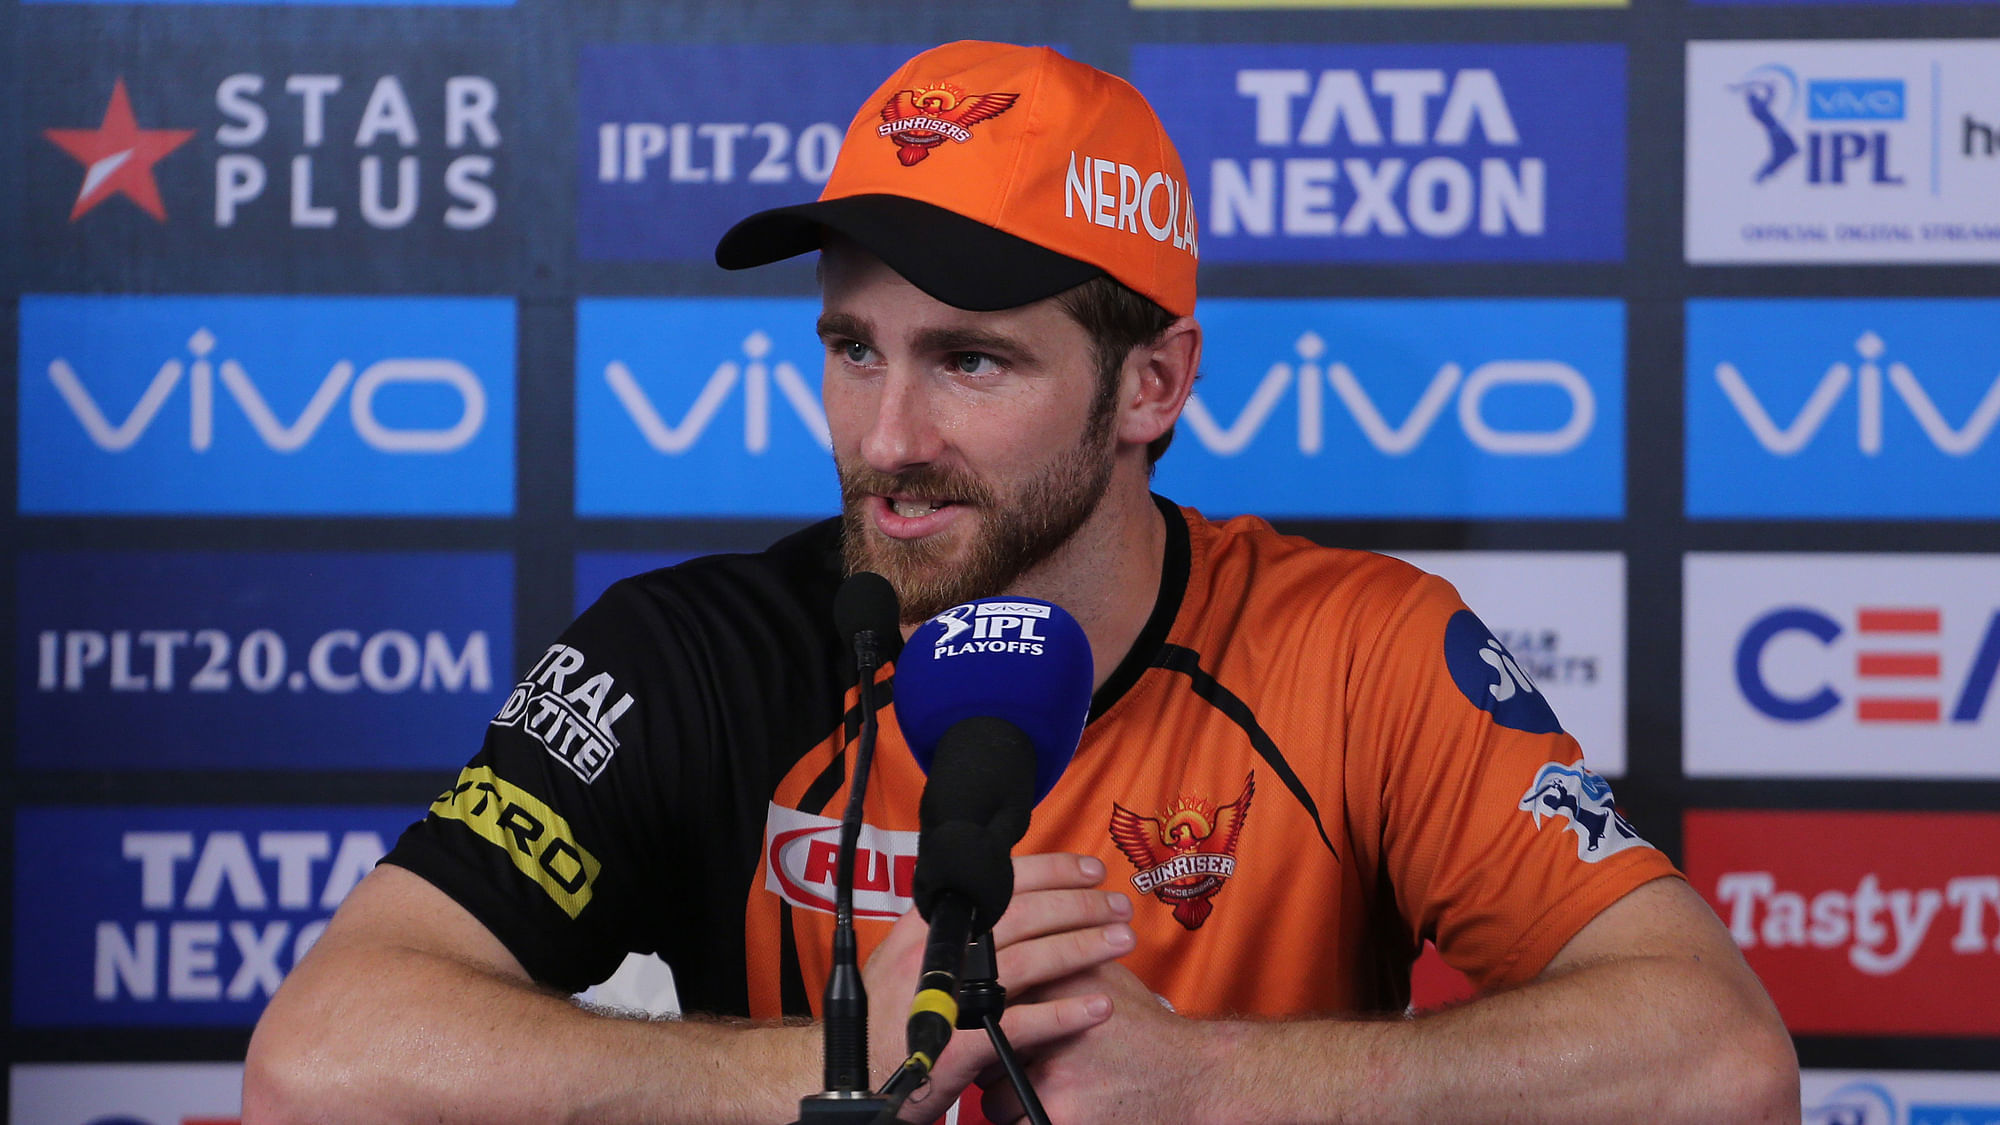 Sunrisers Hyderabad Captain Kane Williamson addressed the media after their loss to CSK in Qualifier 1.&nbsp;